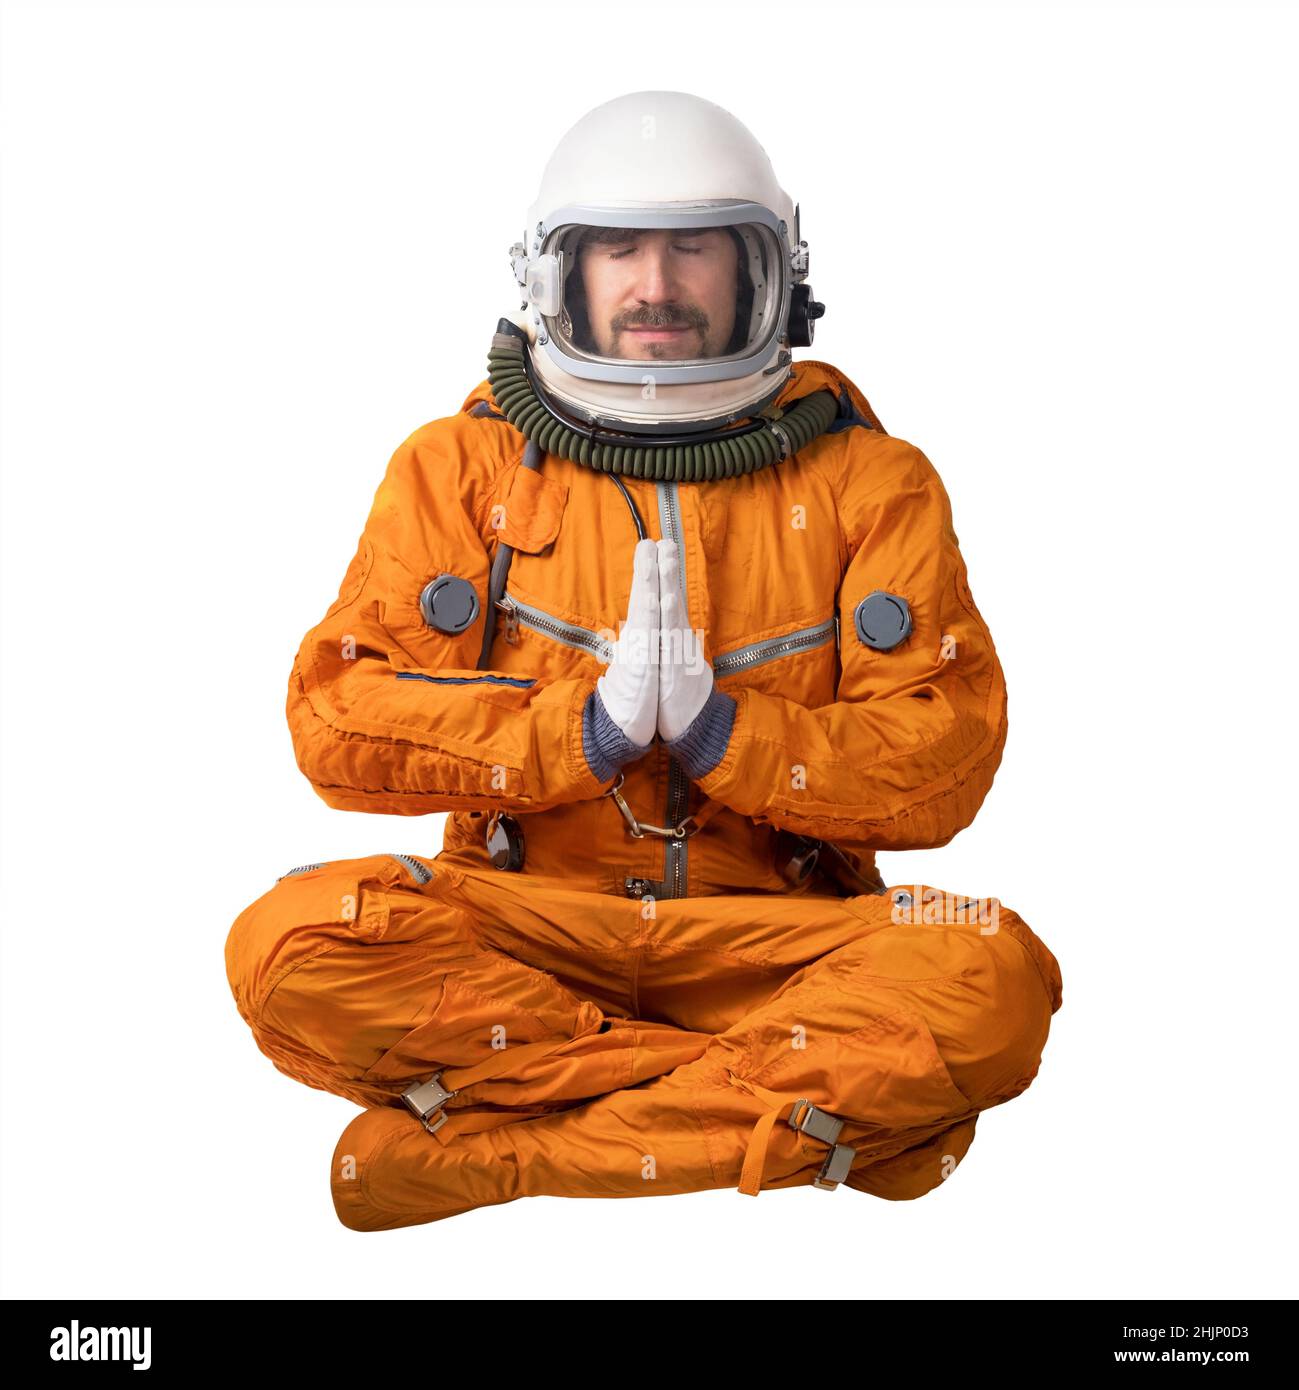 Astronaut wearing orange space suit and space helmet sitting in a lotus pose focused meditating putting his hands together in prayer gesture isolated Stock Photo